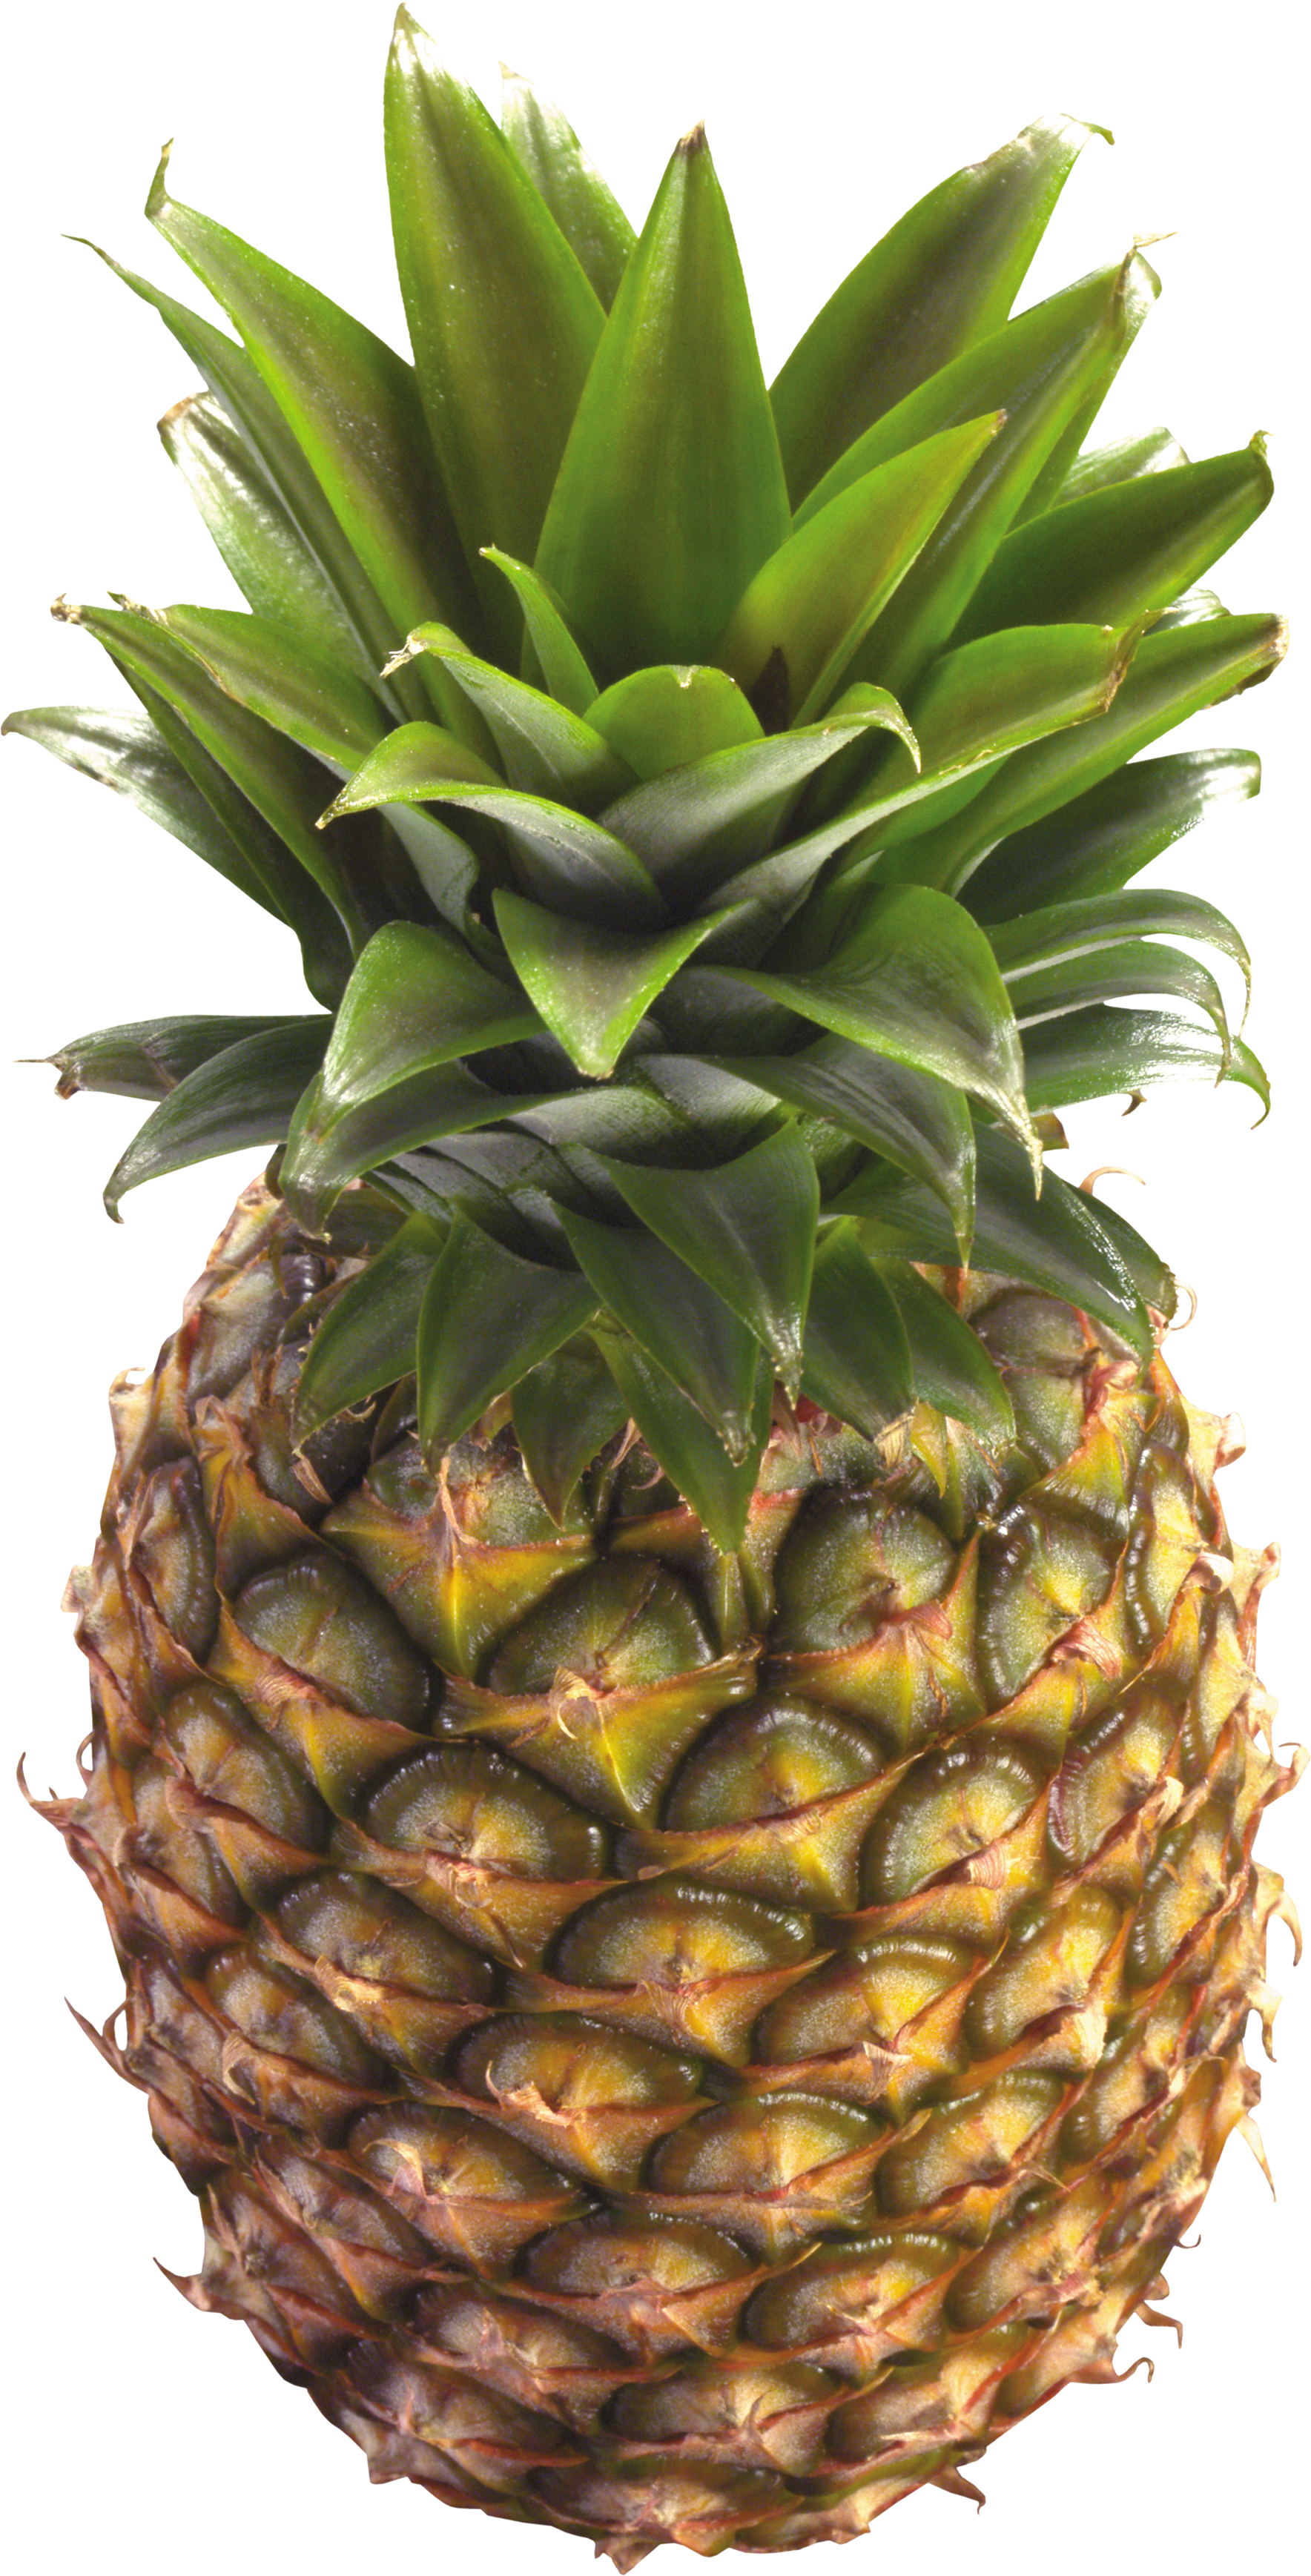 Pineapple PNG images Download